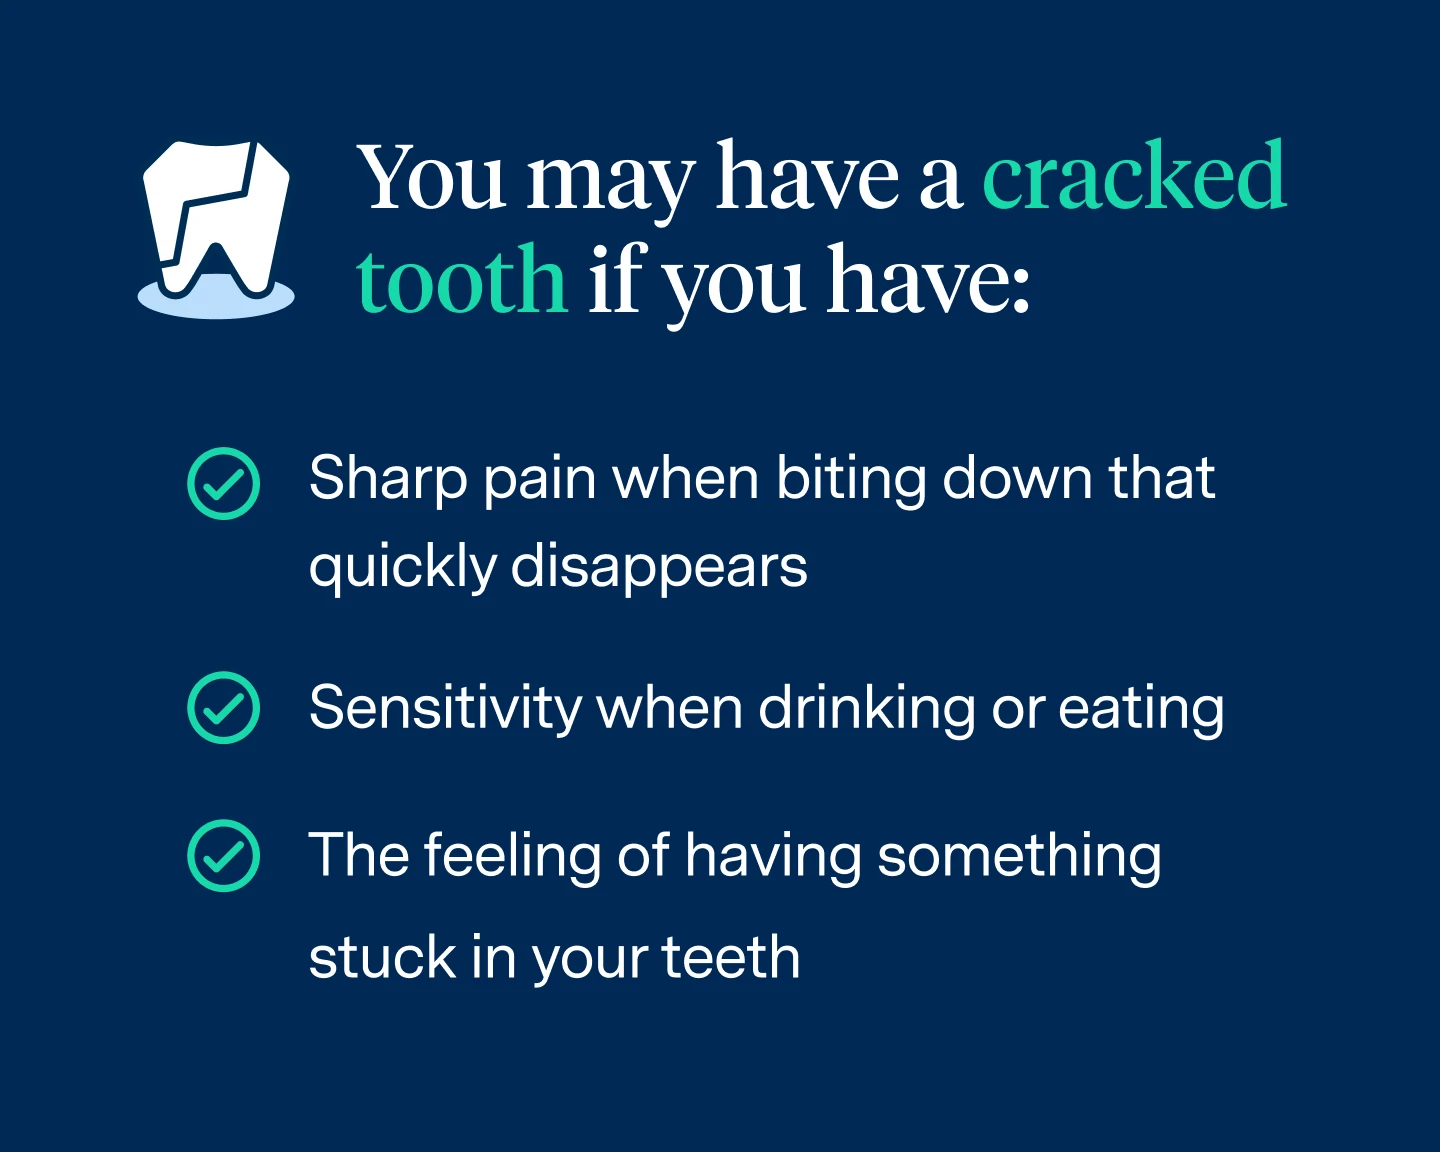 The patient may have a cracked tooth if they experience:
Sharp pain when biting down and the pain quickly disappears
Sensitivity in the tooth when drinking or eating hot and cold foods
The feeling of having something stuck in your teeth